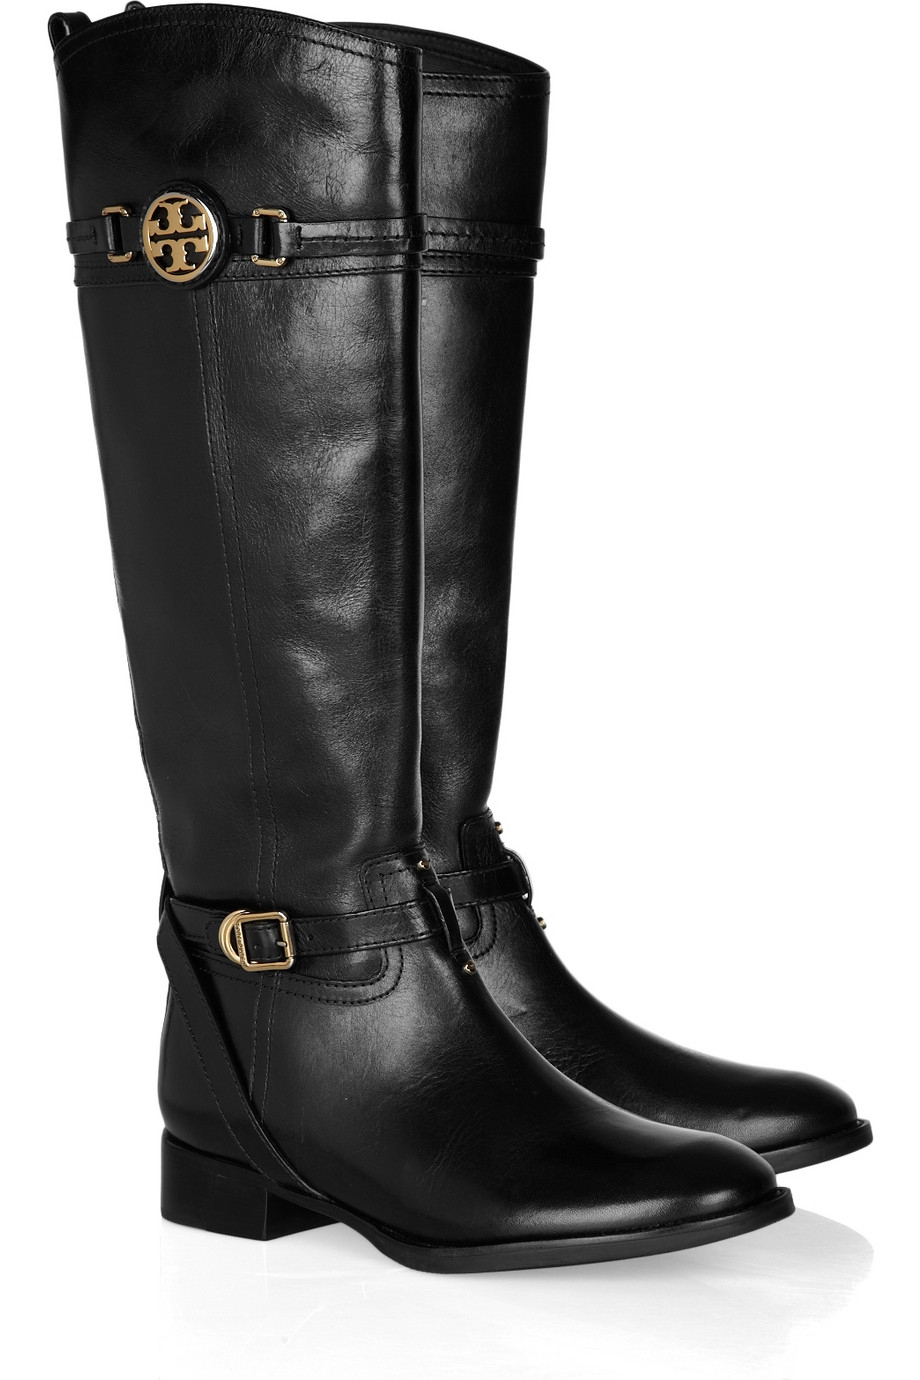 Tory Burch Calista Leather Riding Boots in Black - Lyst